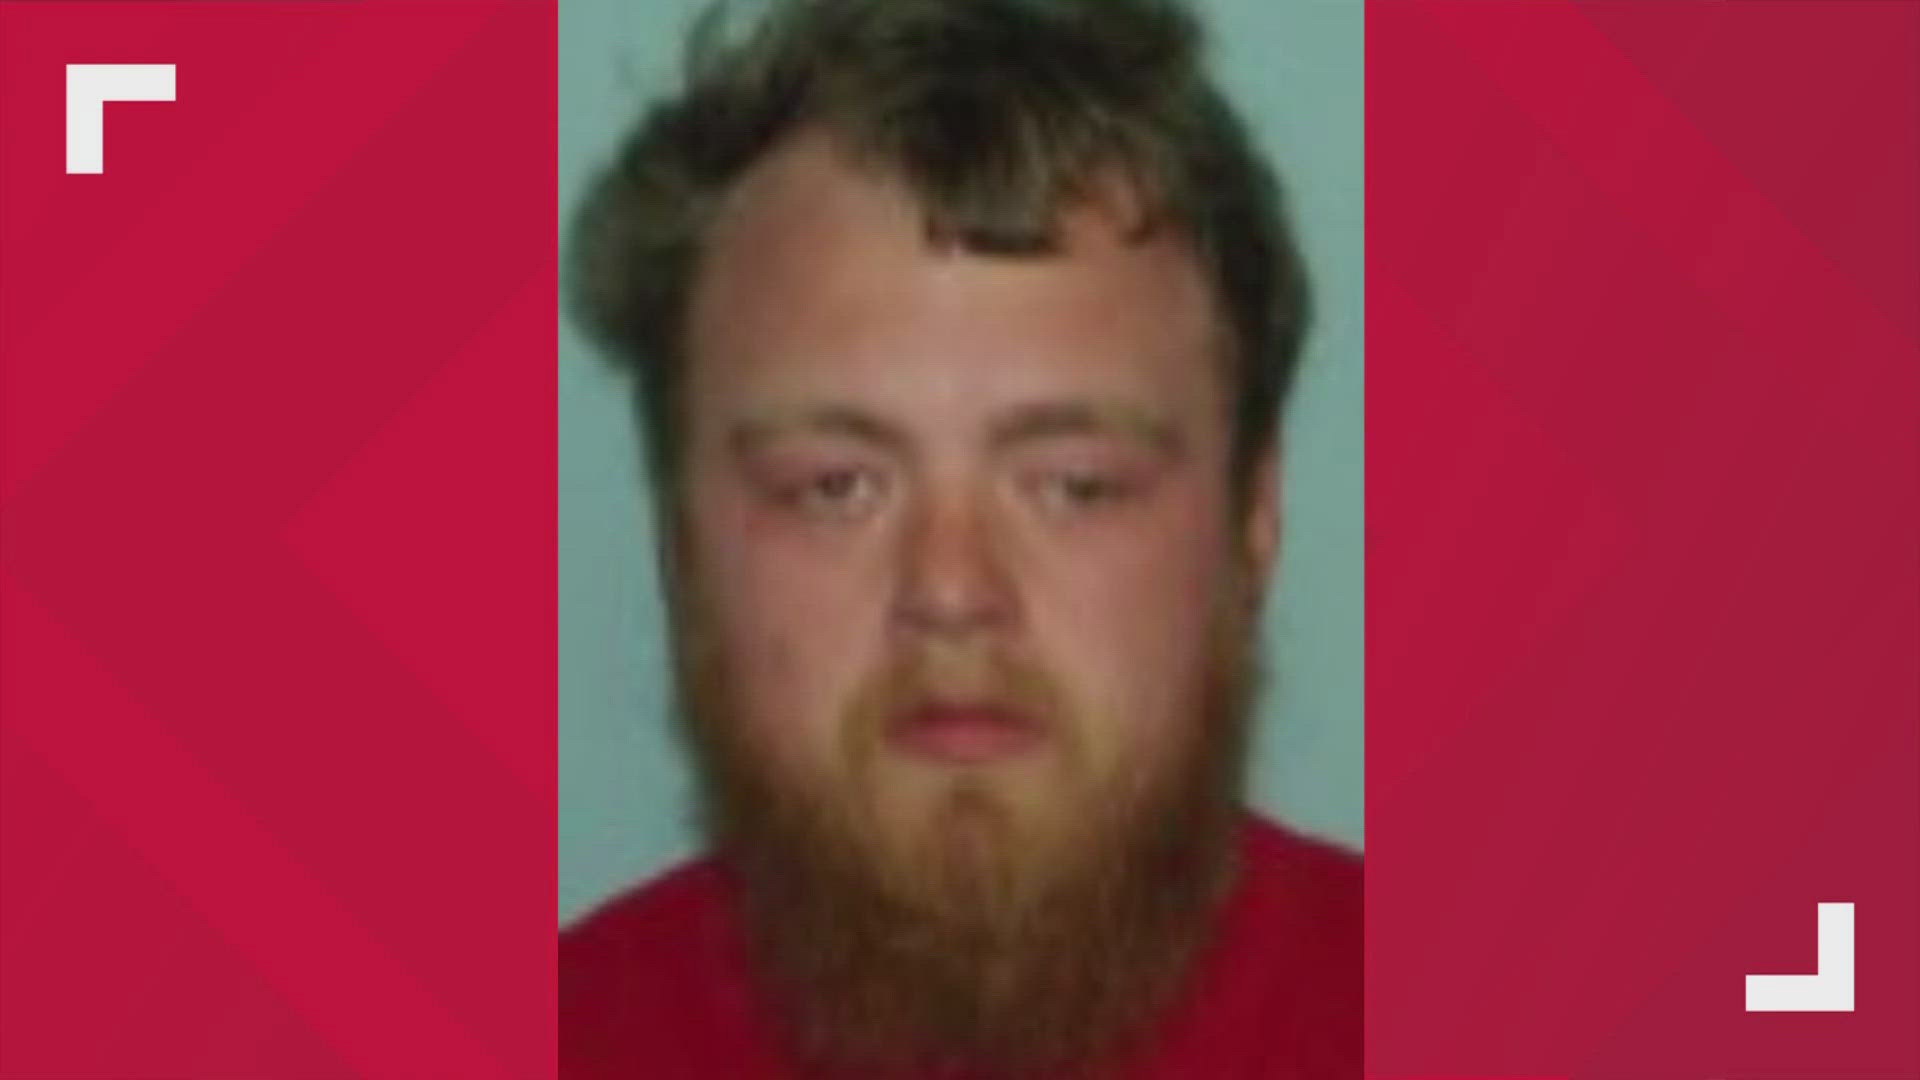 Jacob Paxton, 27, was arrested Thursday and charged with a first-degree felony count of theft.